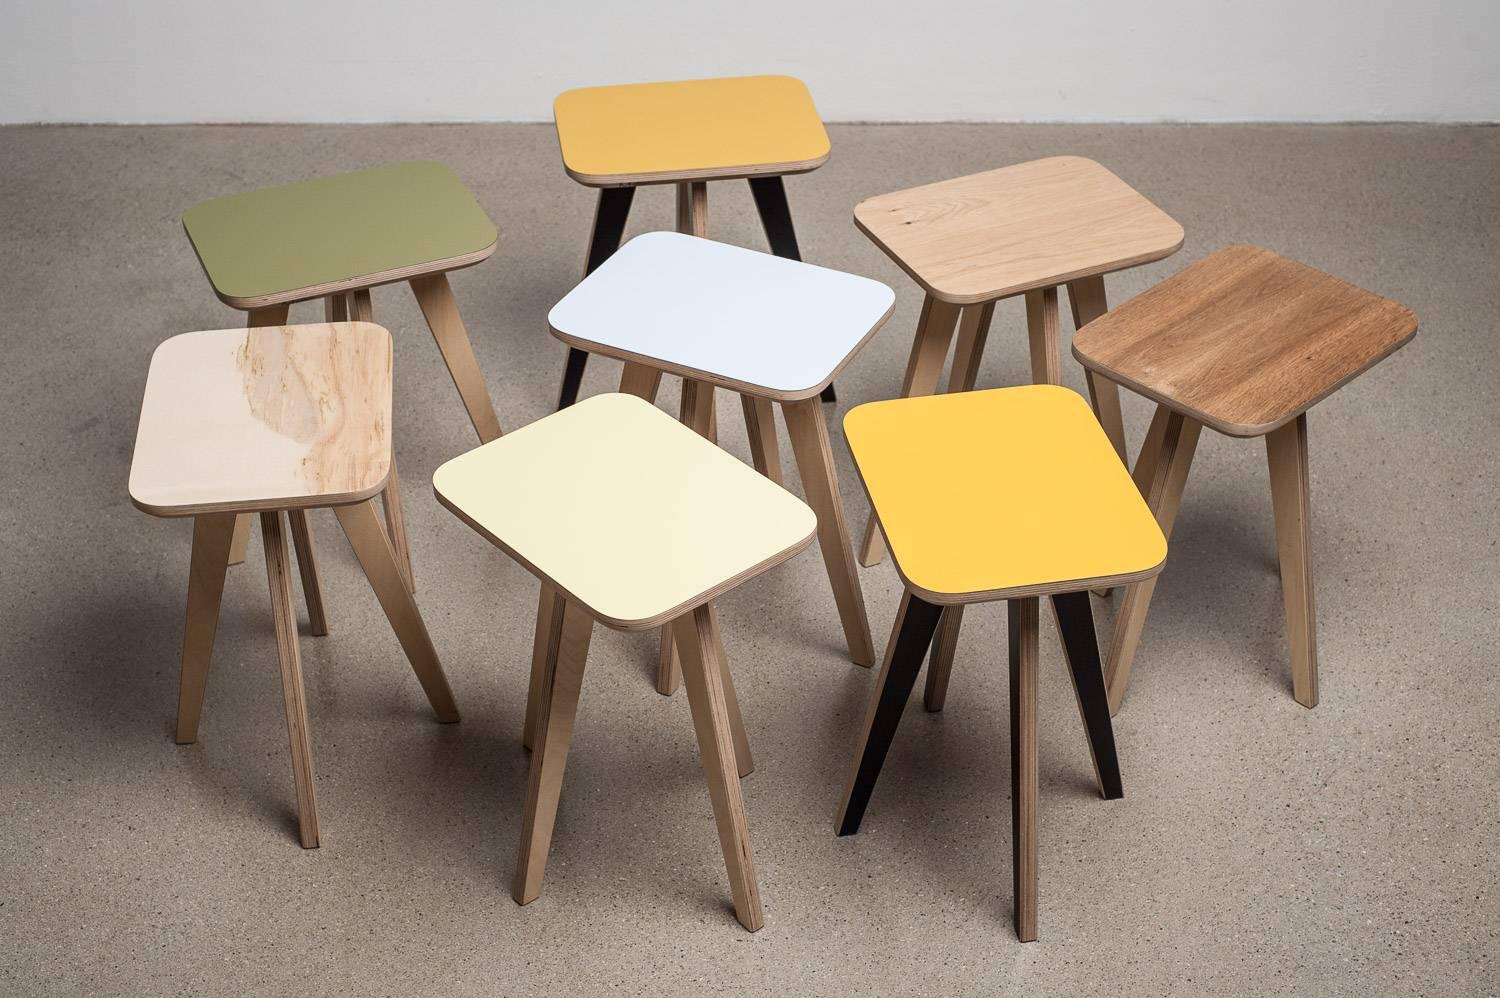 The Hoscha stool is available in a variety of finishes and can be used as a stool or is just at home being used as a side table.

Please enquire for available colors.